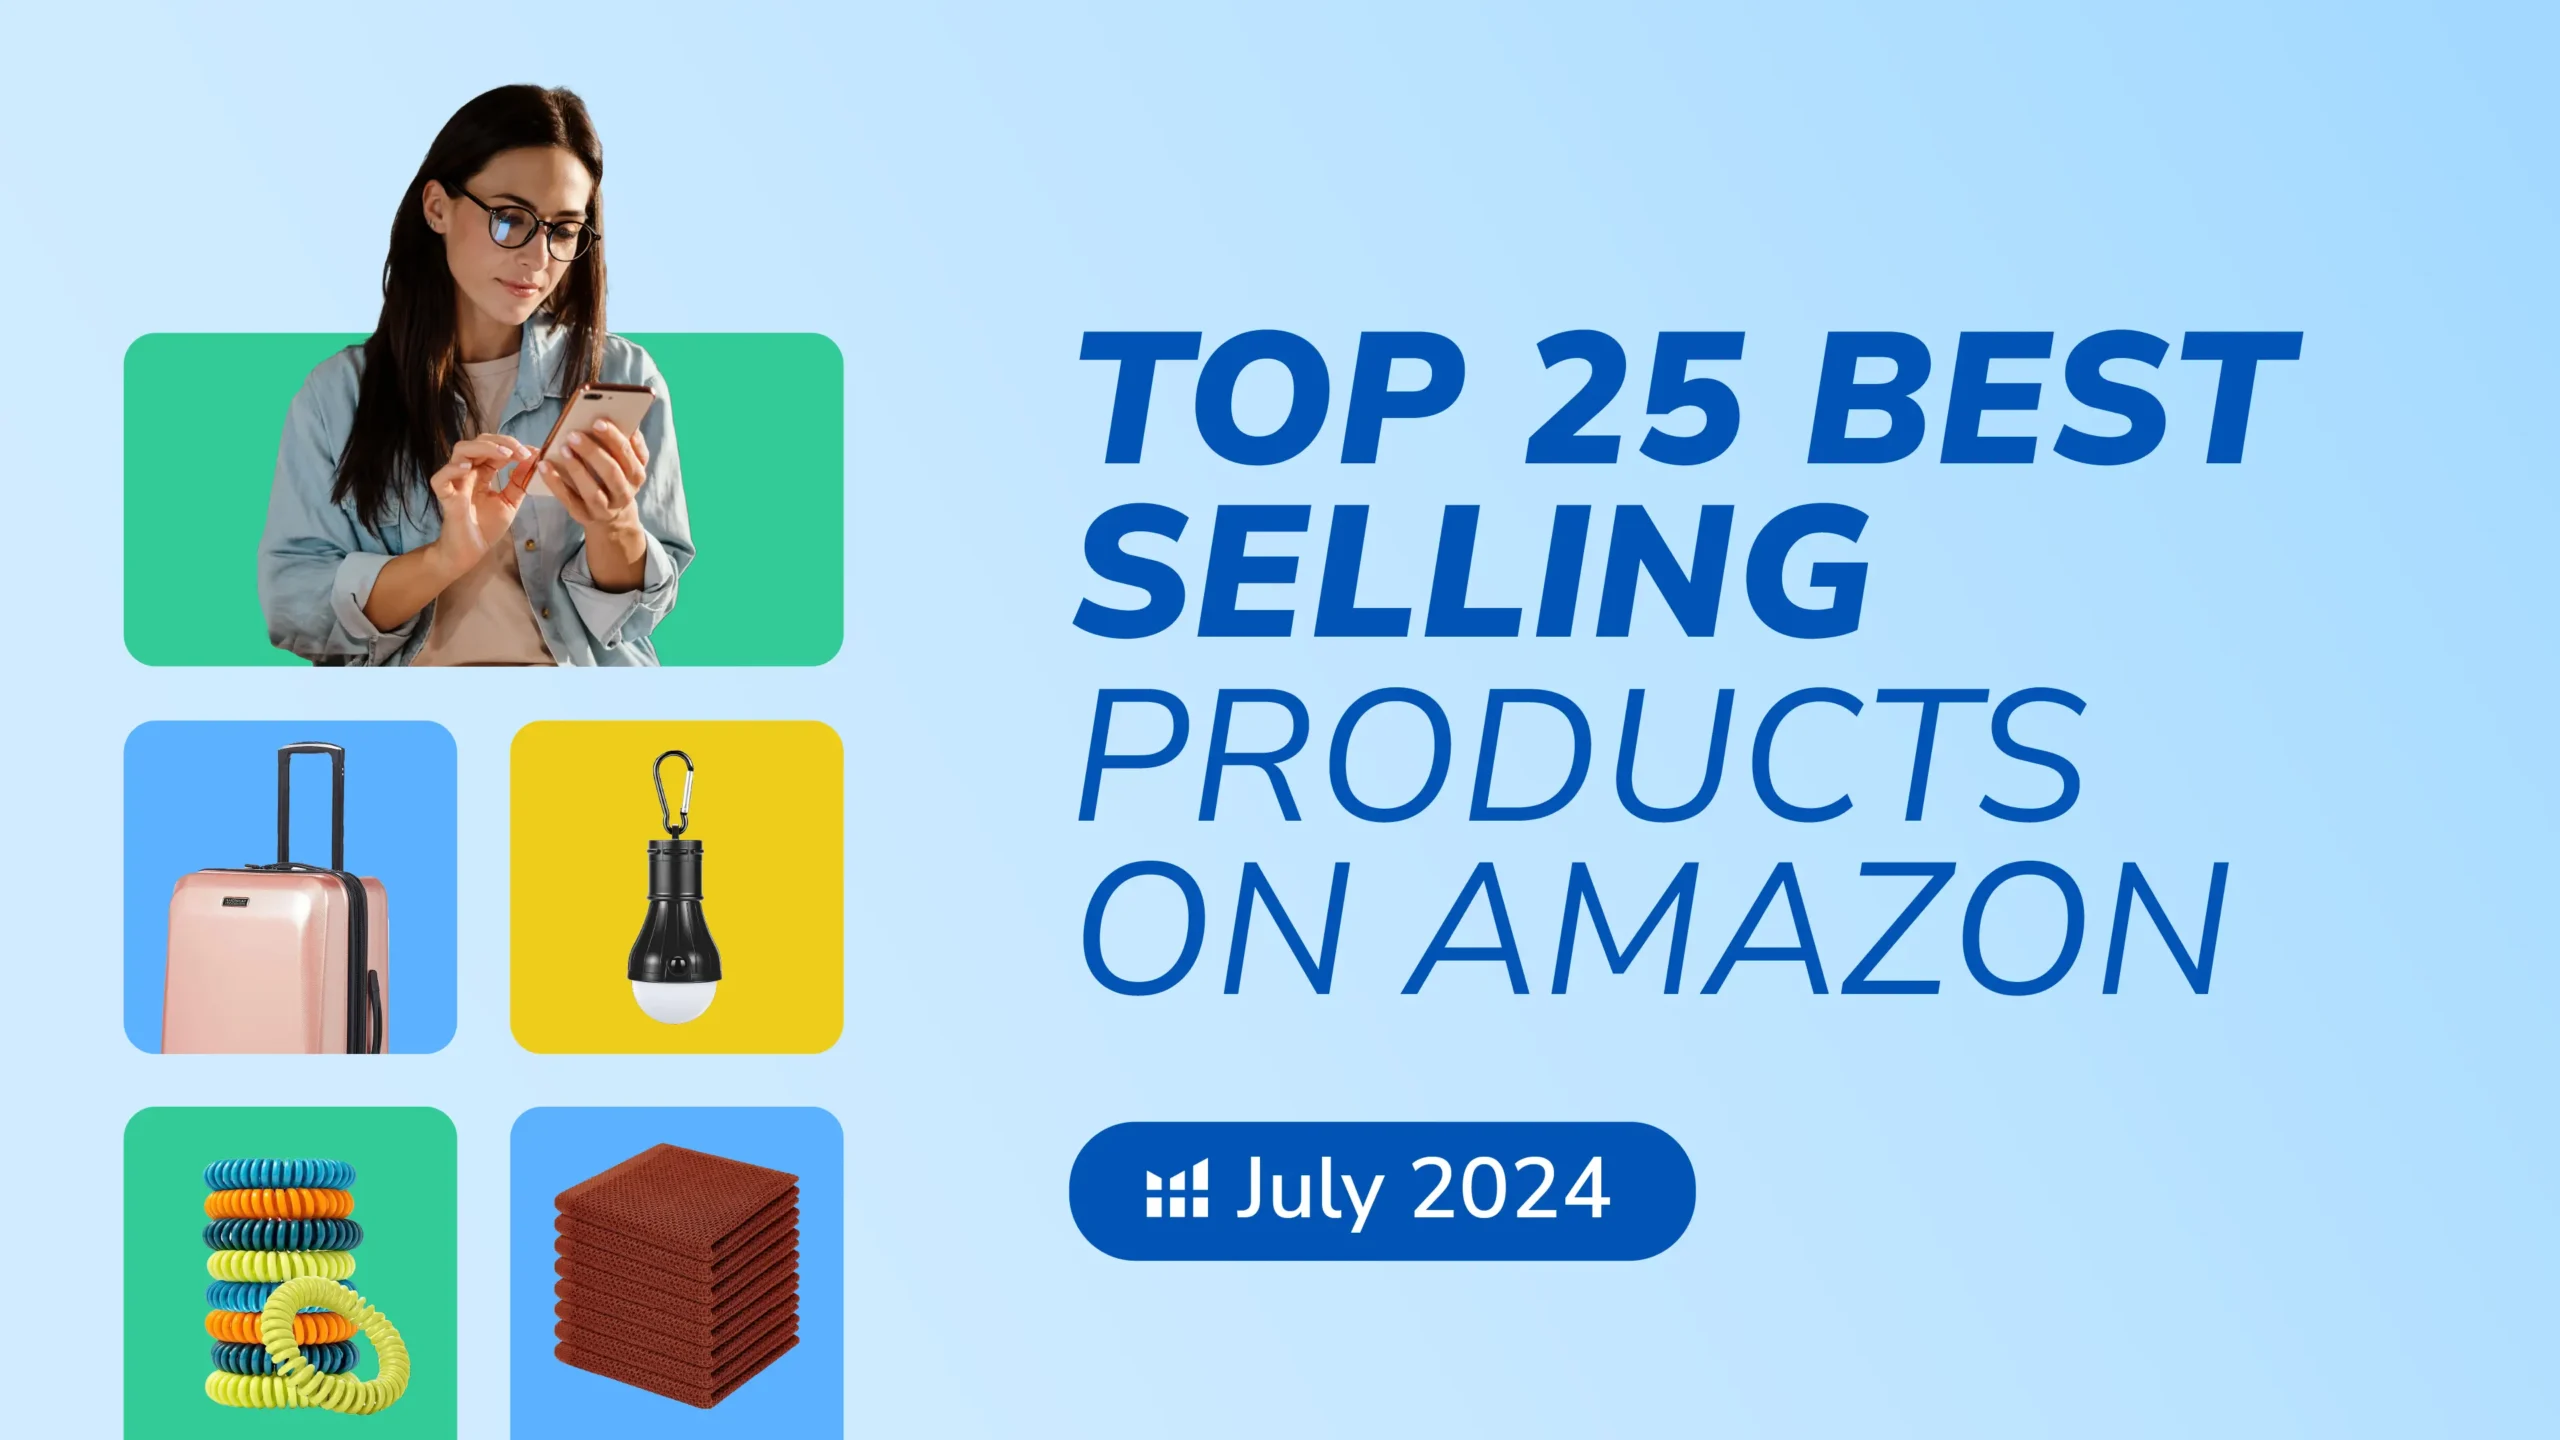 Top-25-Best-Selling-Products-on-Amazon-July-2024